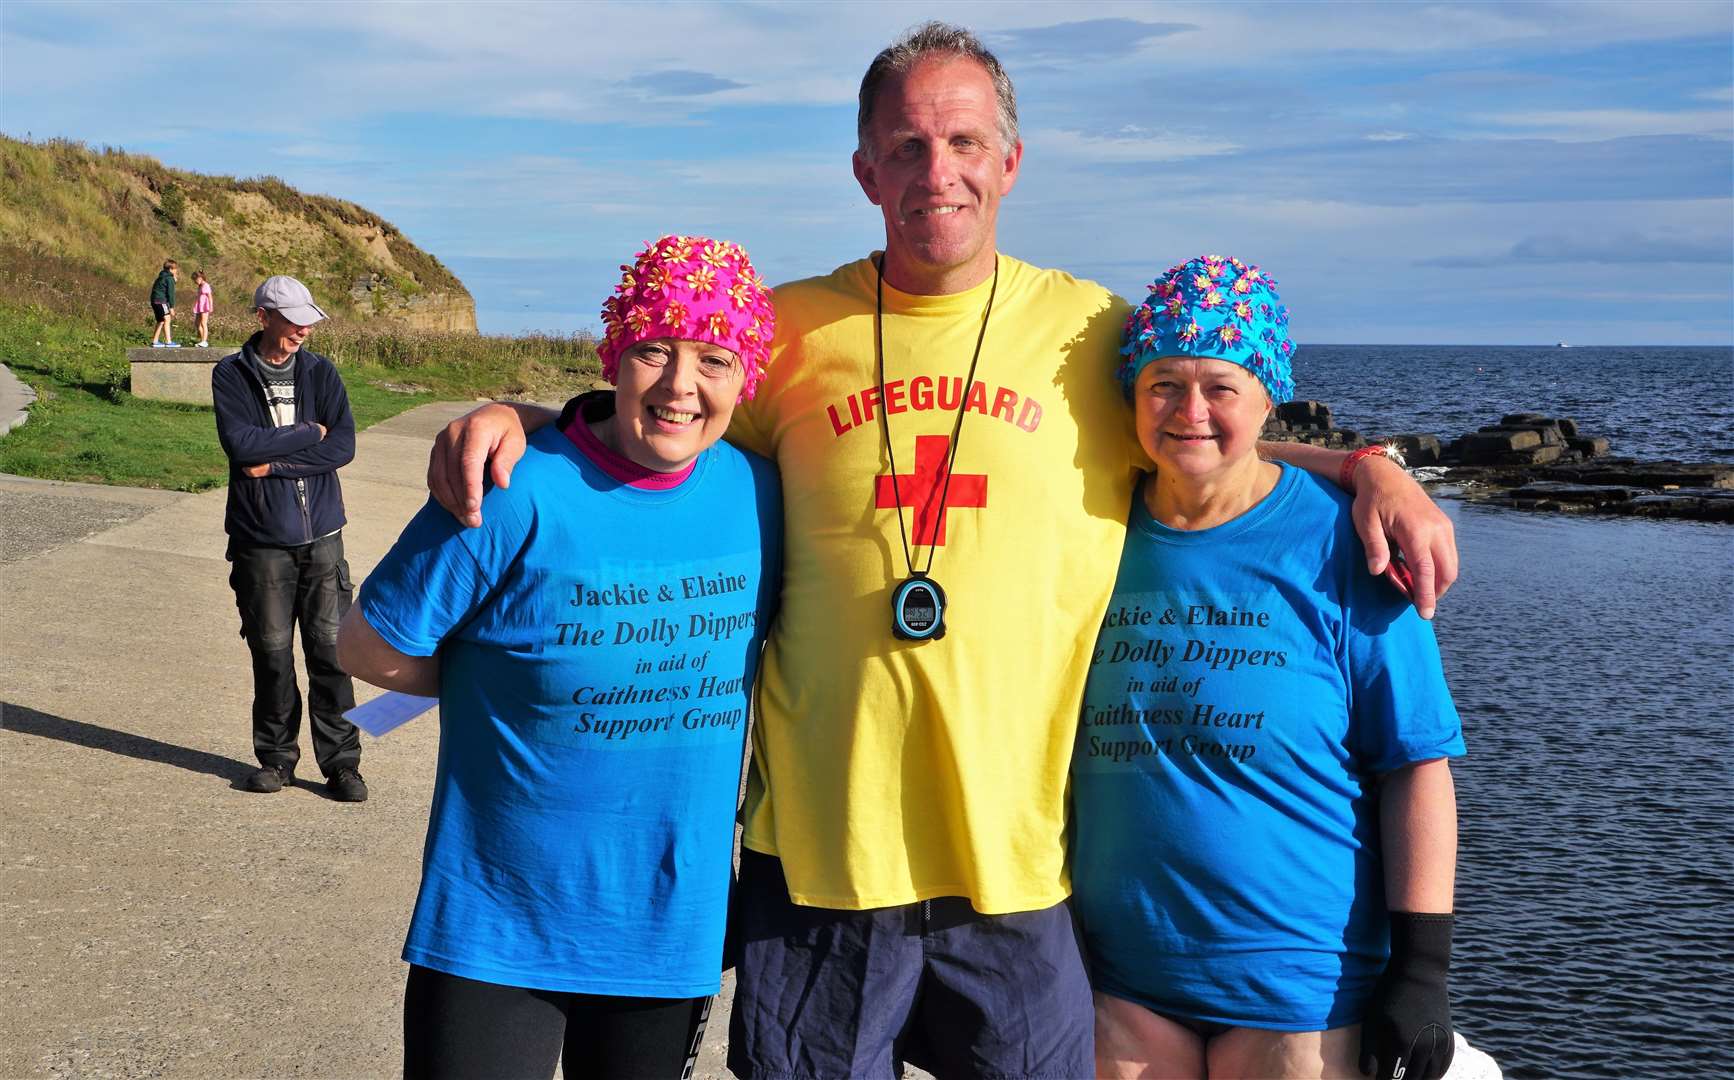 From left, Jacqueline Mackay, Alastair Ferrier, and Elaine Rosie. Alastair headed up a support team ferrying the two women around the various locations for their charity wild swimming fundraiser in September. Picture: DGS